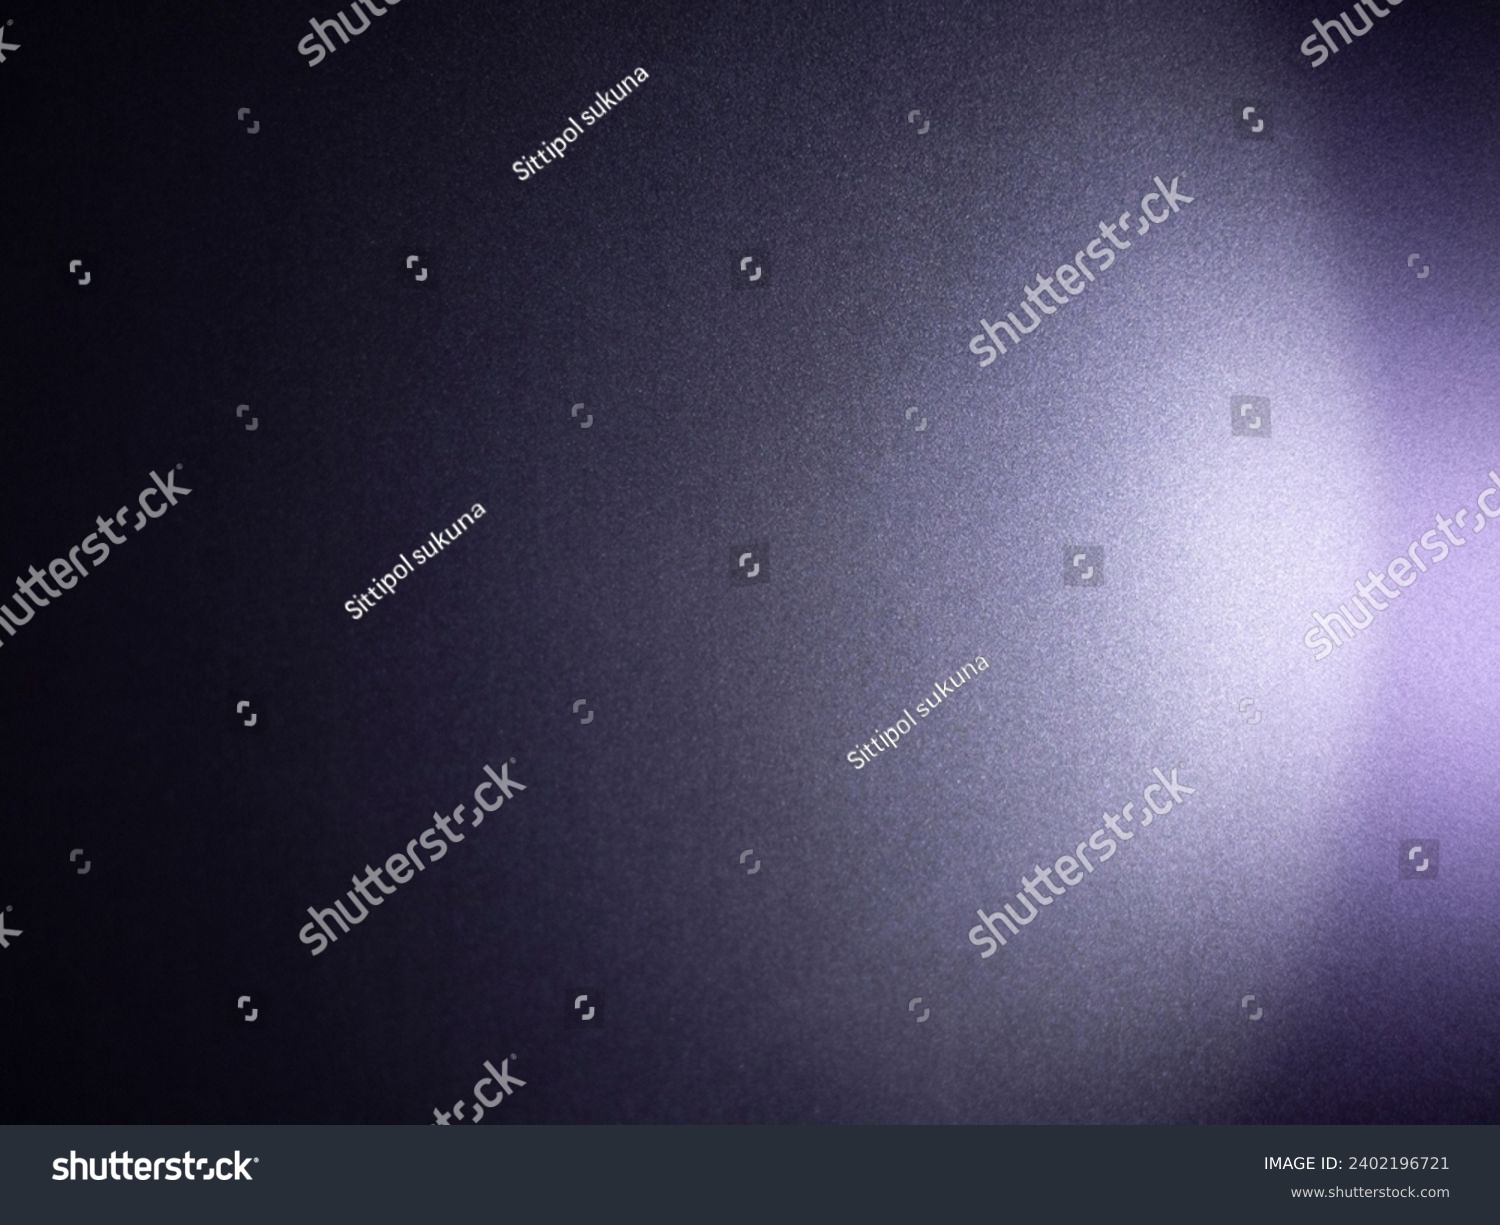 Background violet gradient black overlay abstract background black, night, dark, evening, with space for text, for a purple golden background. #2402196721